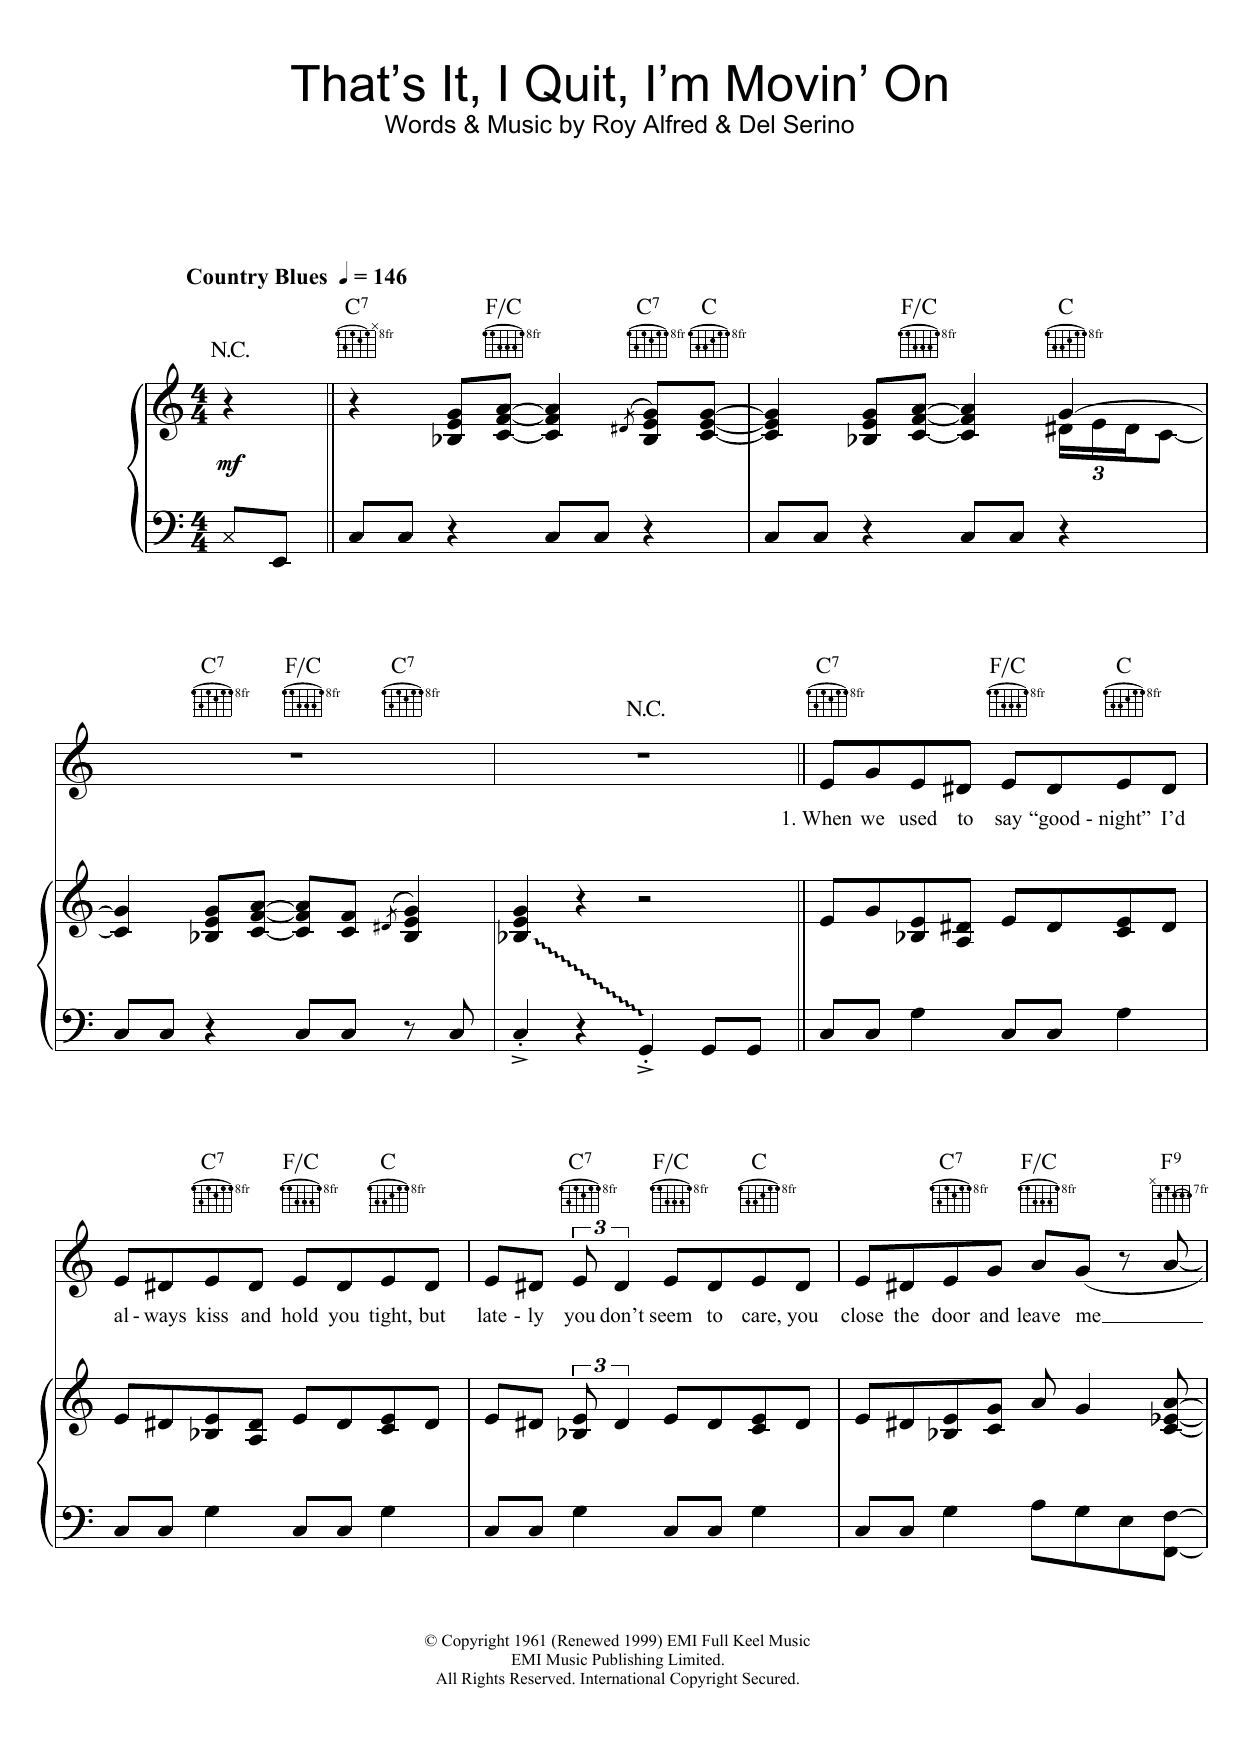 Download Adele That's It, I Quit, I'm Movin' On Sheet Music